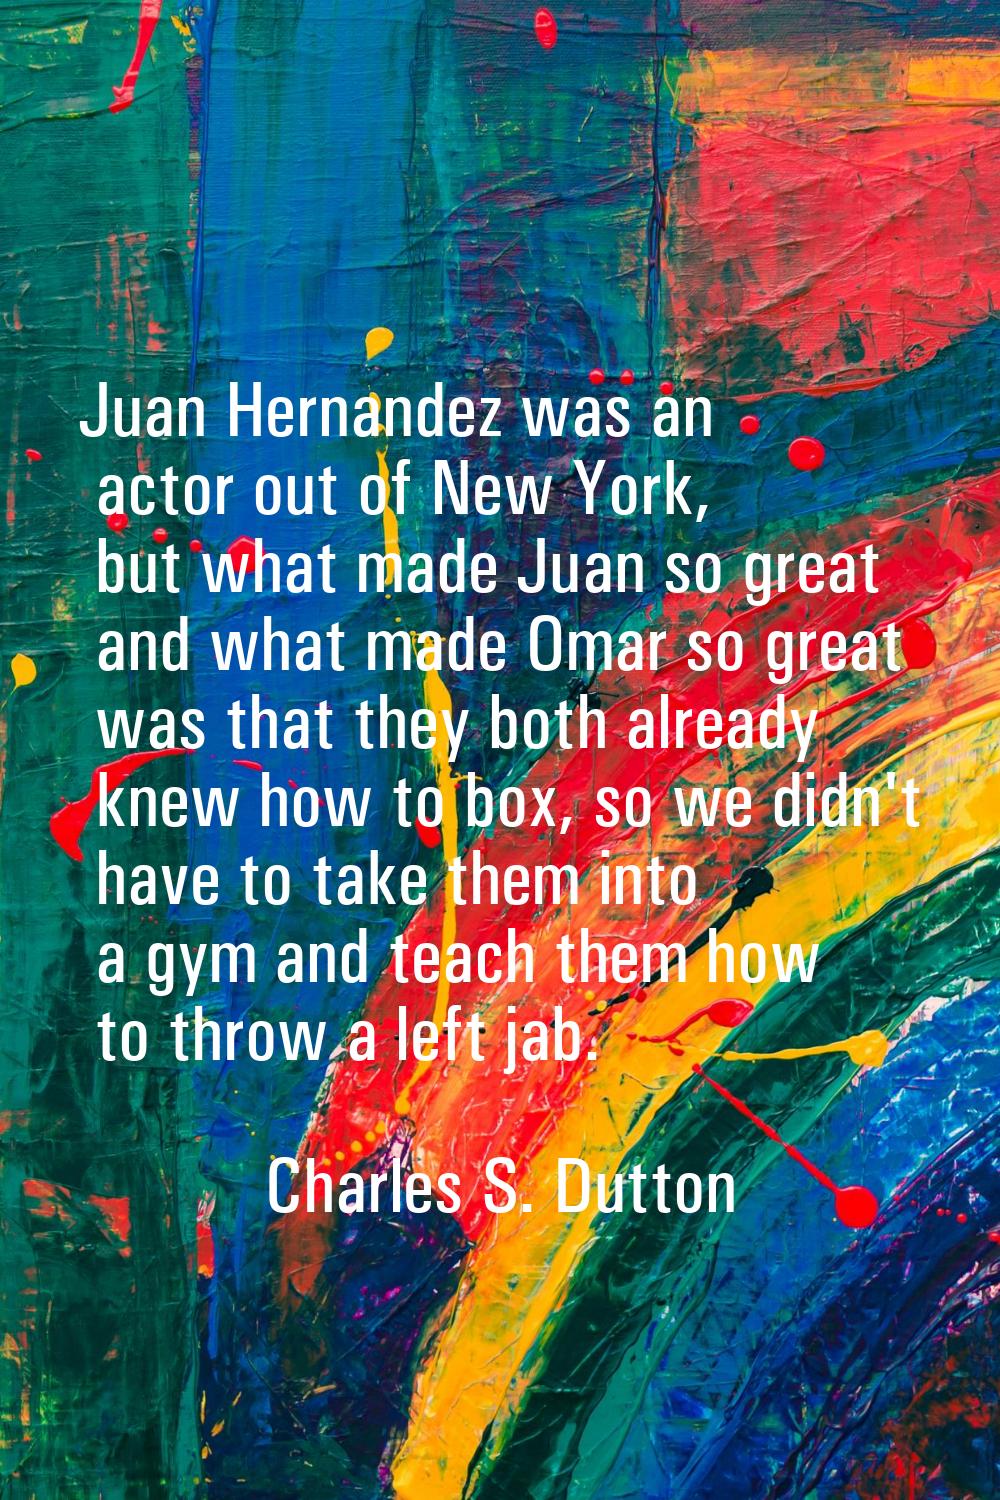 Juan Hernandez was an actor out of New York, but what made Juan so great and what made Omar so grea